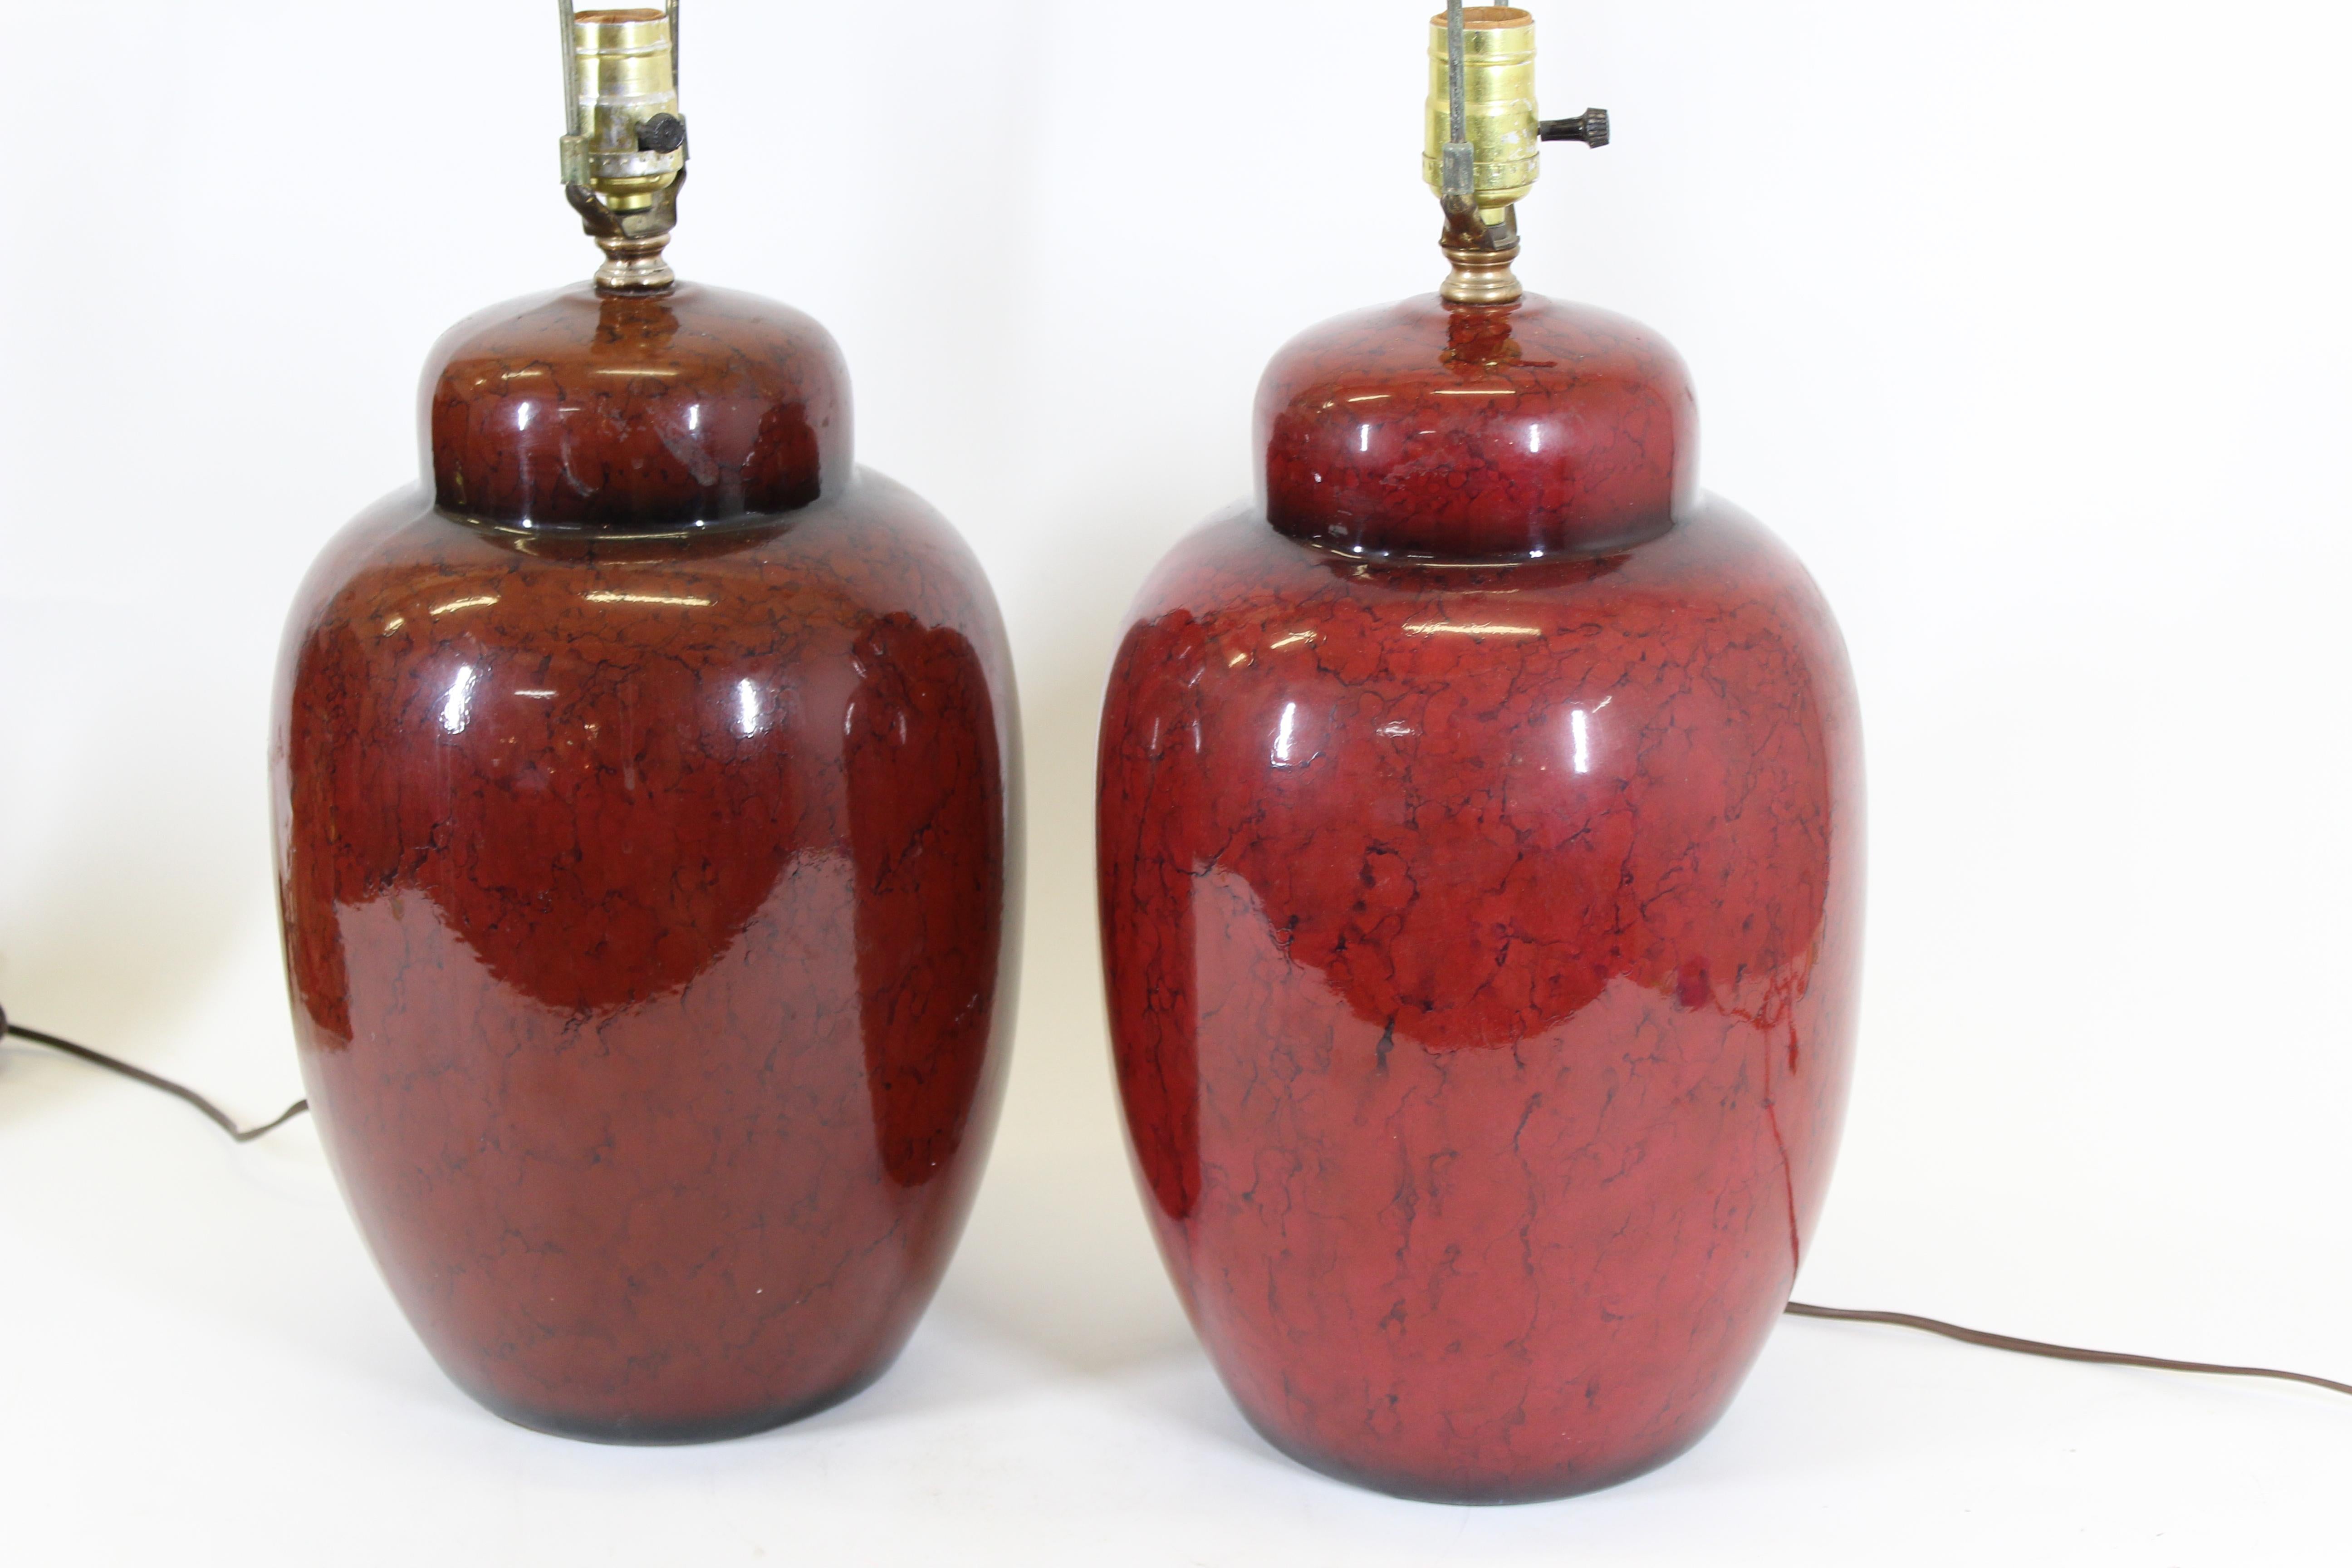 Asian ceramic table lamps in shape of ginger jars, painted in red glaze. In great vintage condition with minor age-appropriate wear.